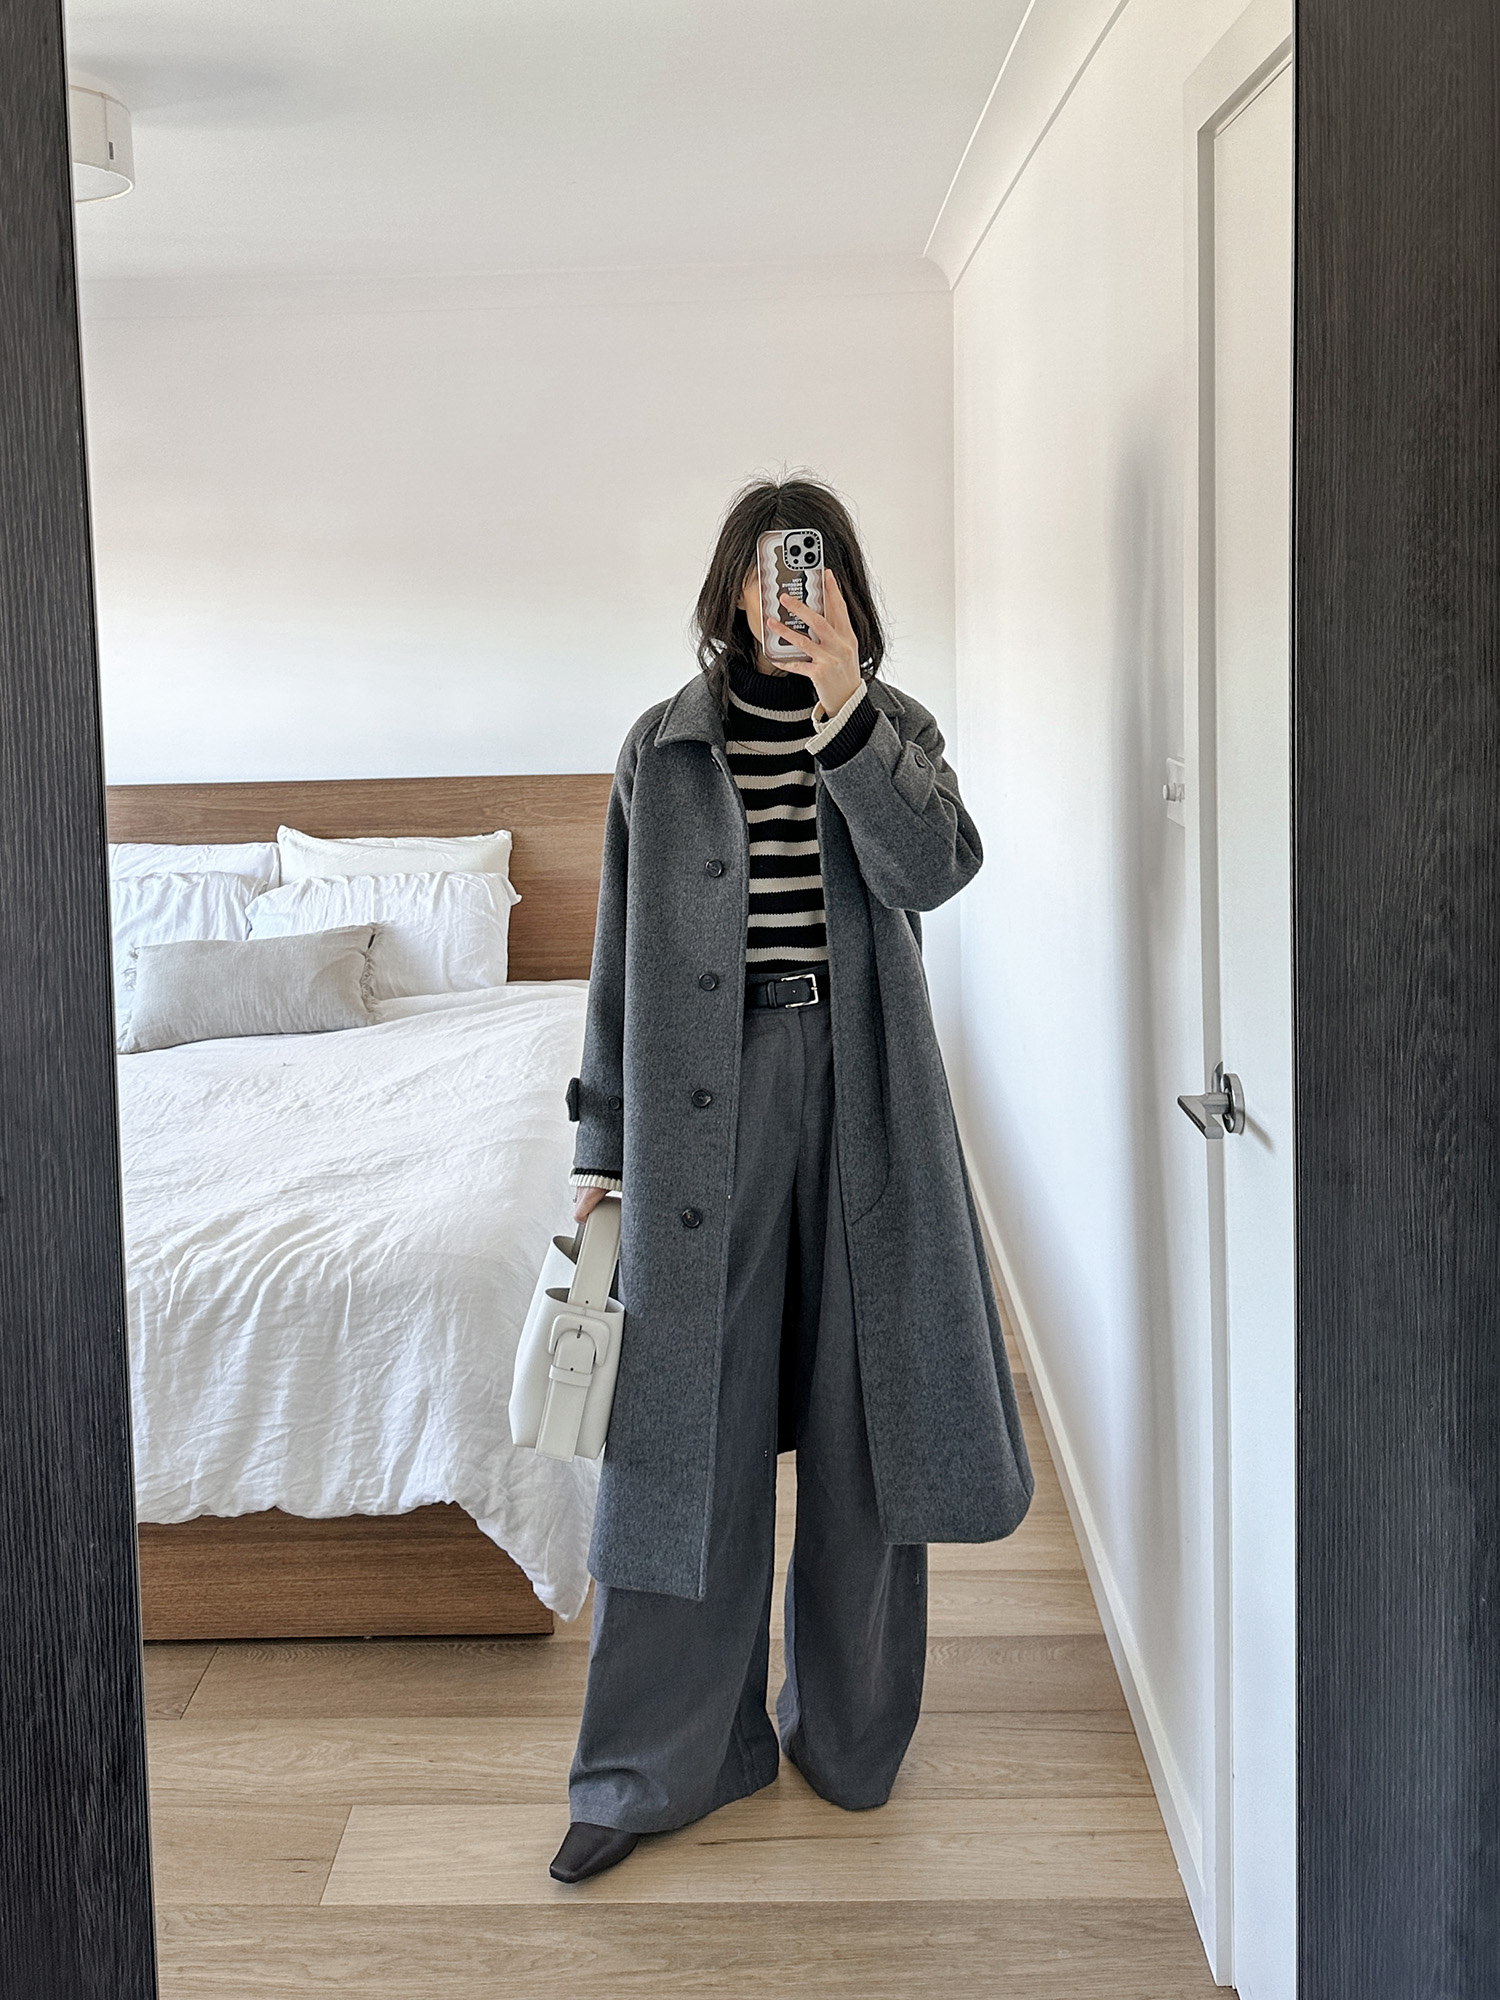 A week of mid-winter outfits